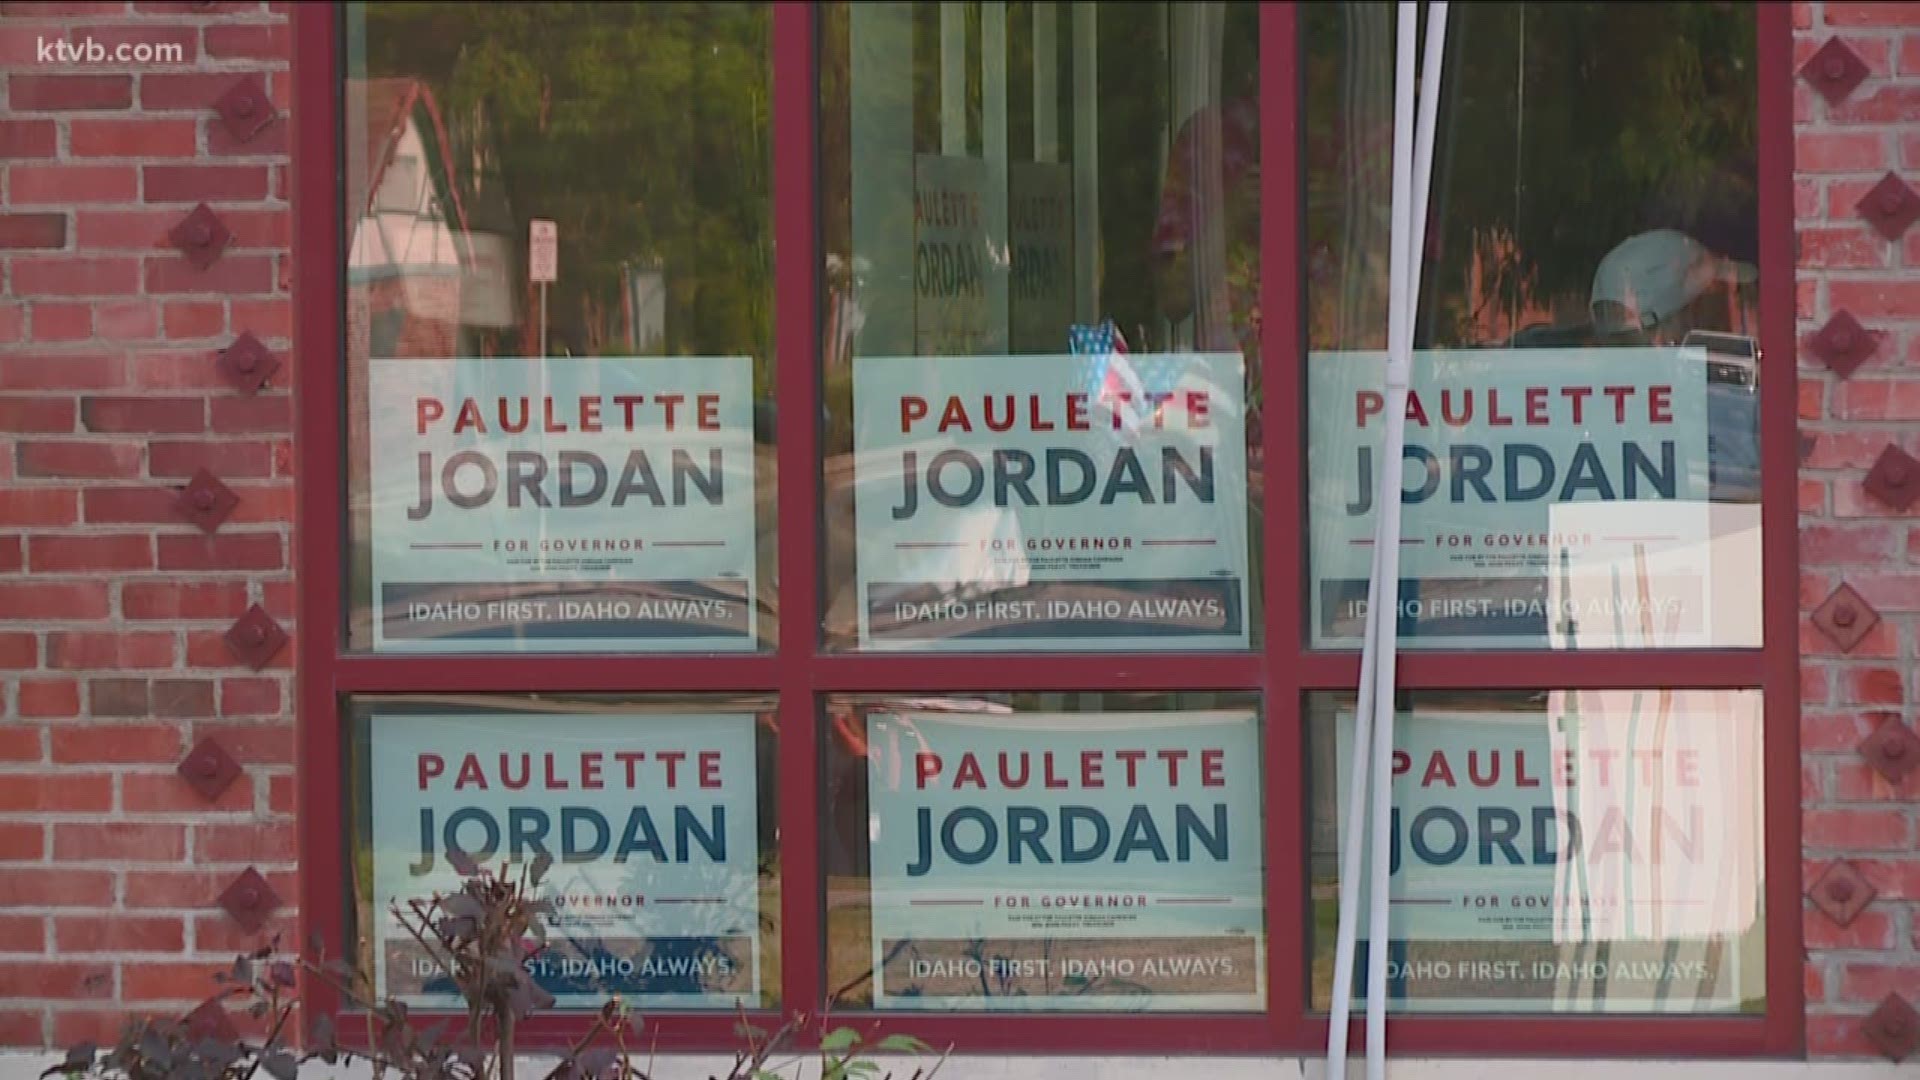 Concerns are being raised over the involvement of Idaho Democratic gubernatorial candidate Paulette Jordan's campaign with the setting up and funding of a federal super political action committee.